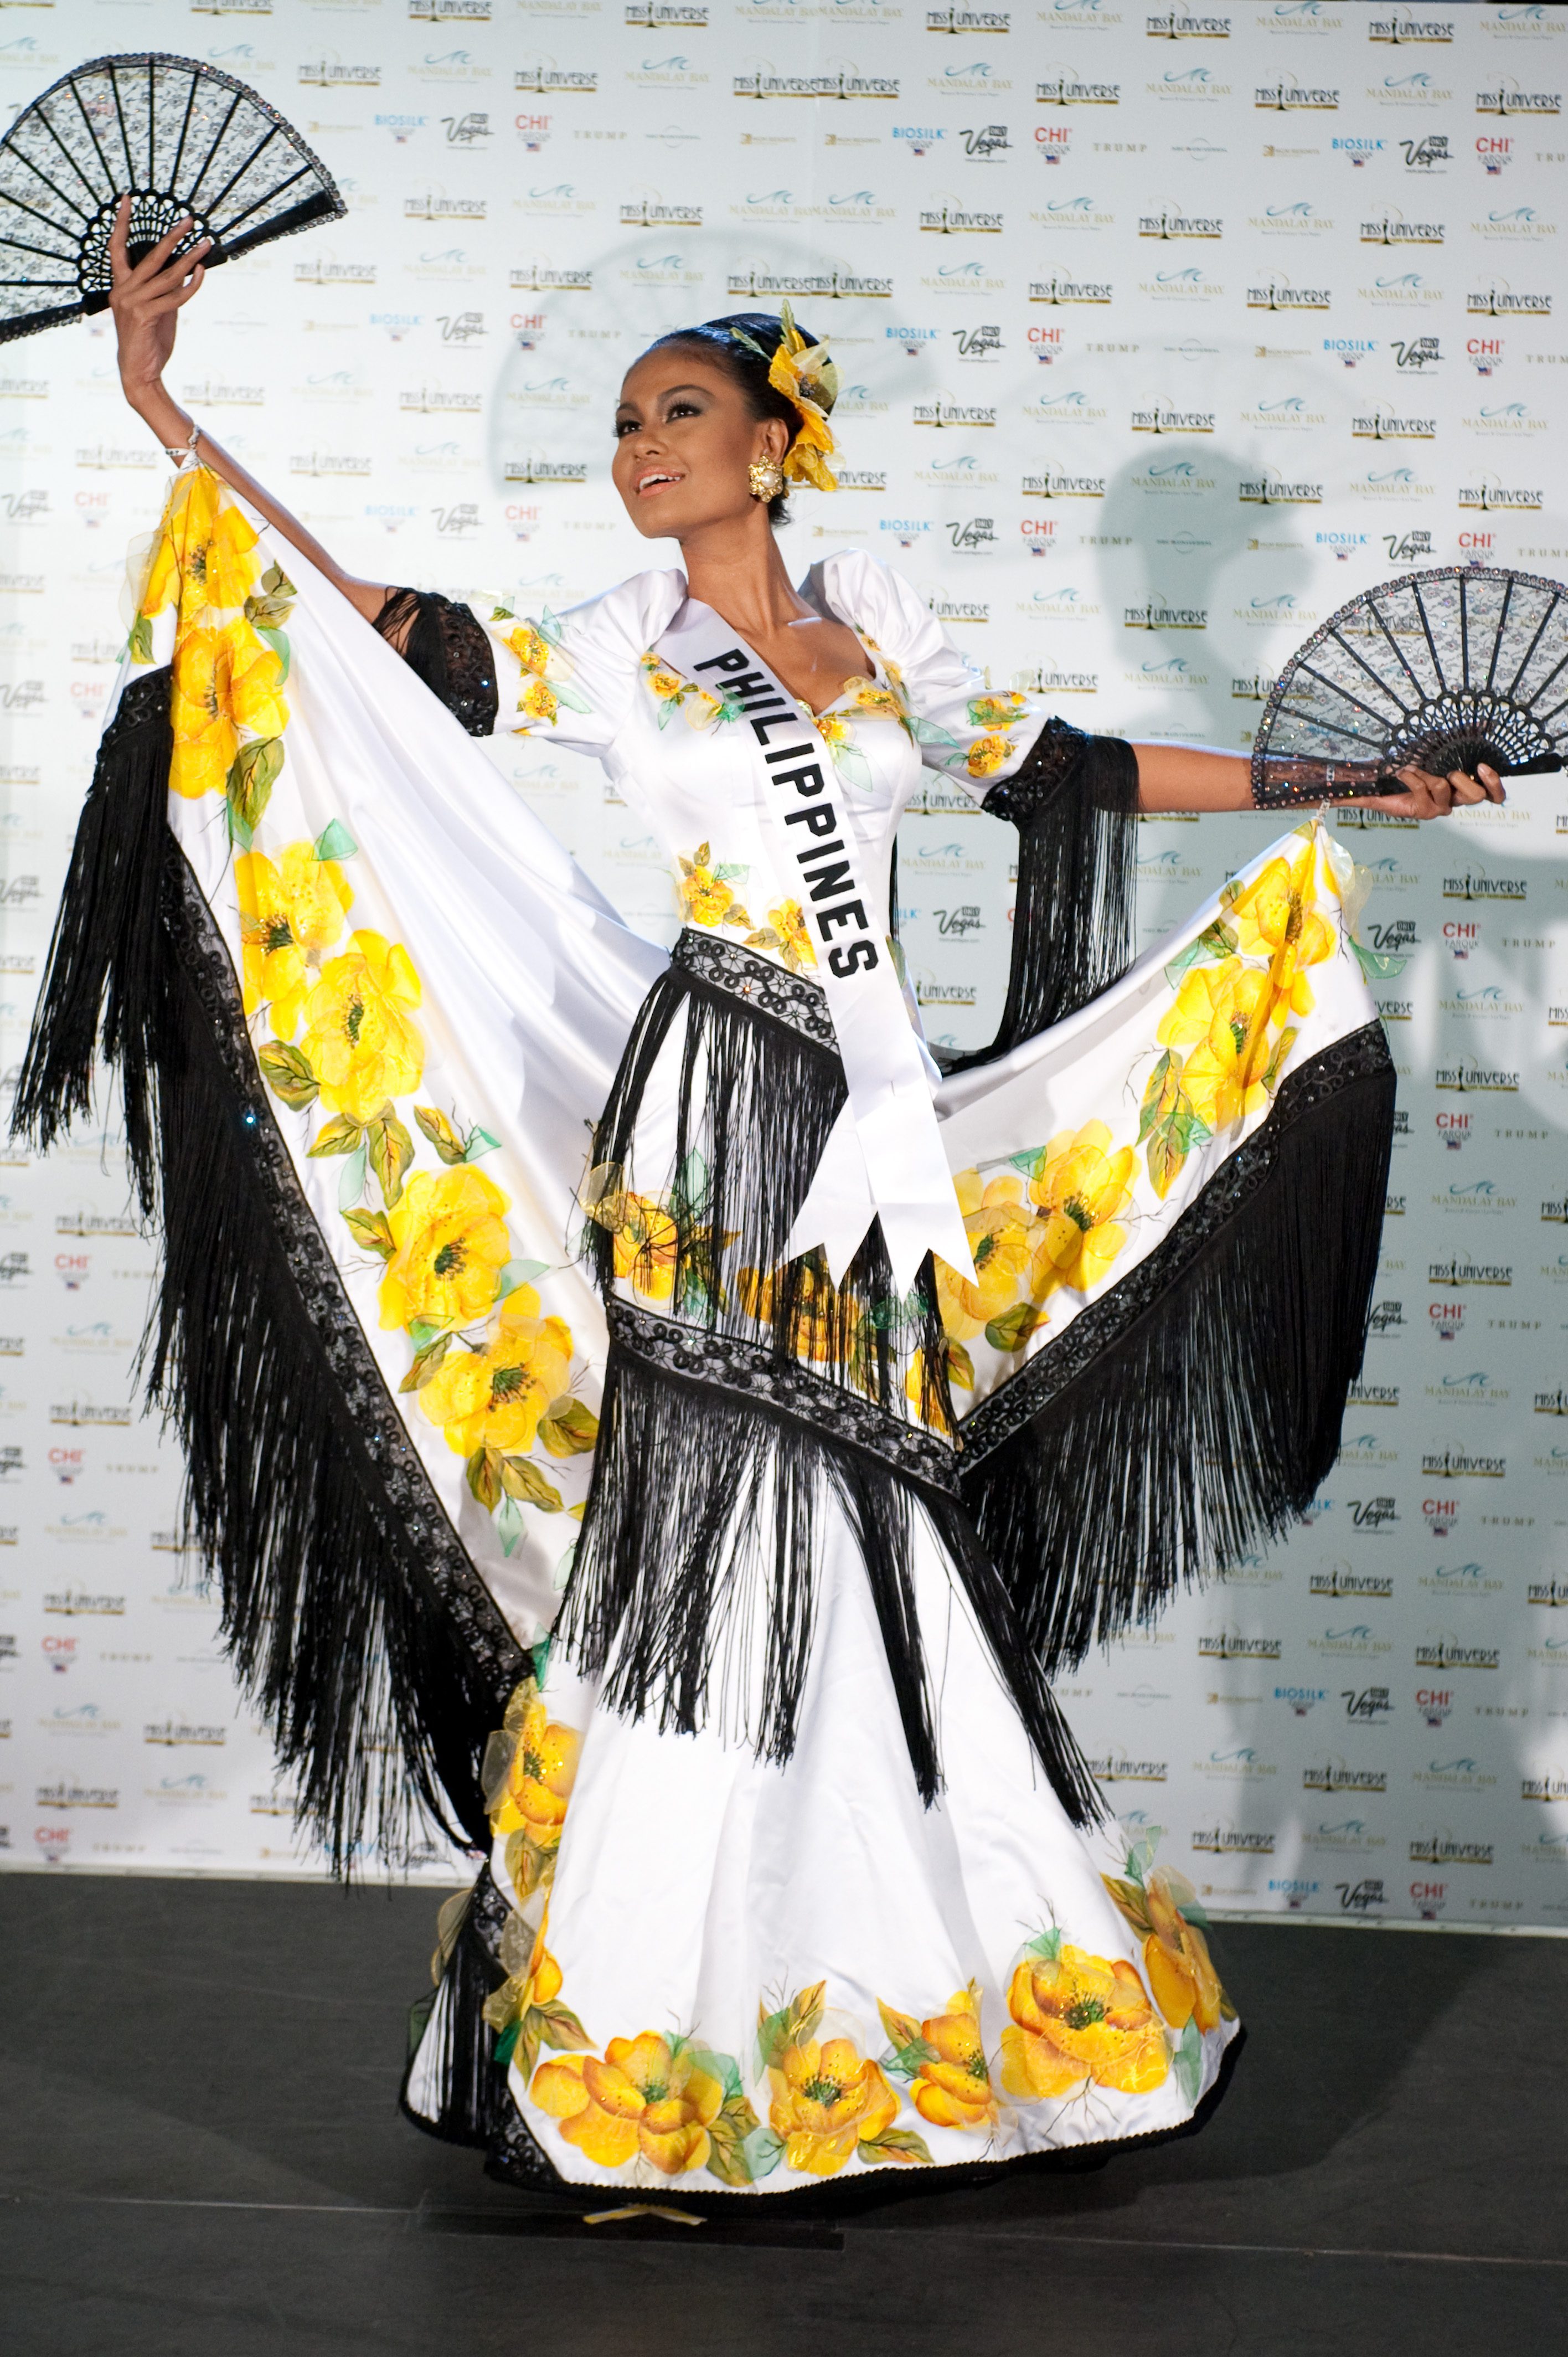 THE COMEBACK.Venus Raj, Miss Philippines 2010, poses for the photographer in her national costume at the Mandalay Bay Resort and Casino in Las Vegas, Nevada on Monday, August 16, 2010. Photo from the Miss Universe Organization  